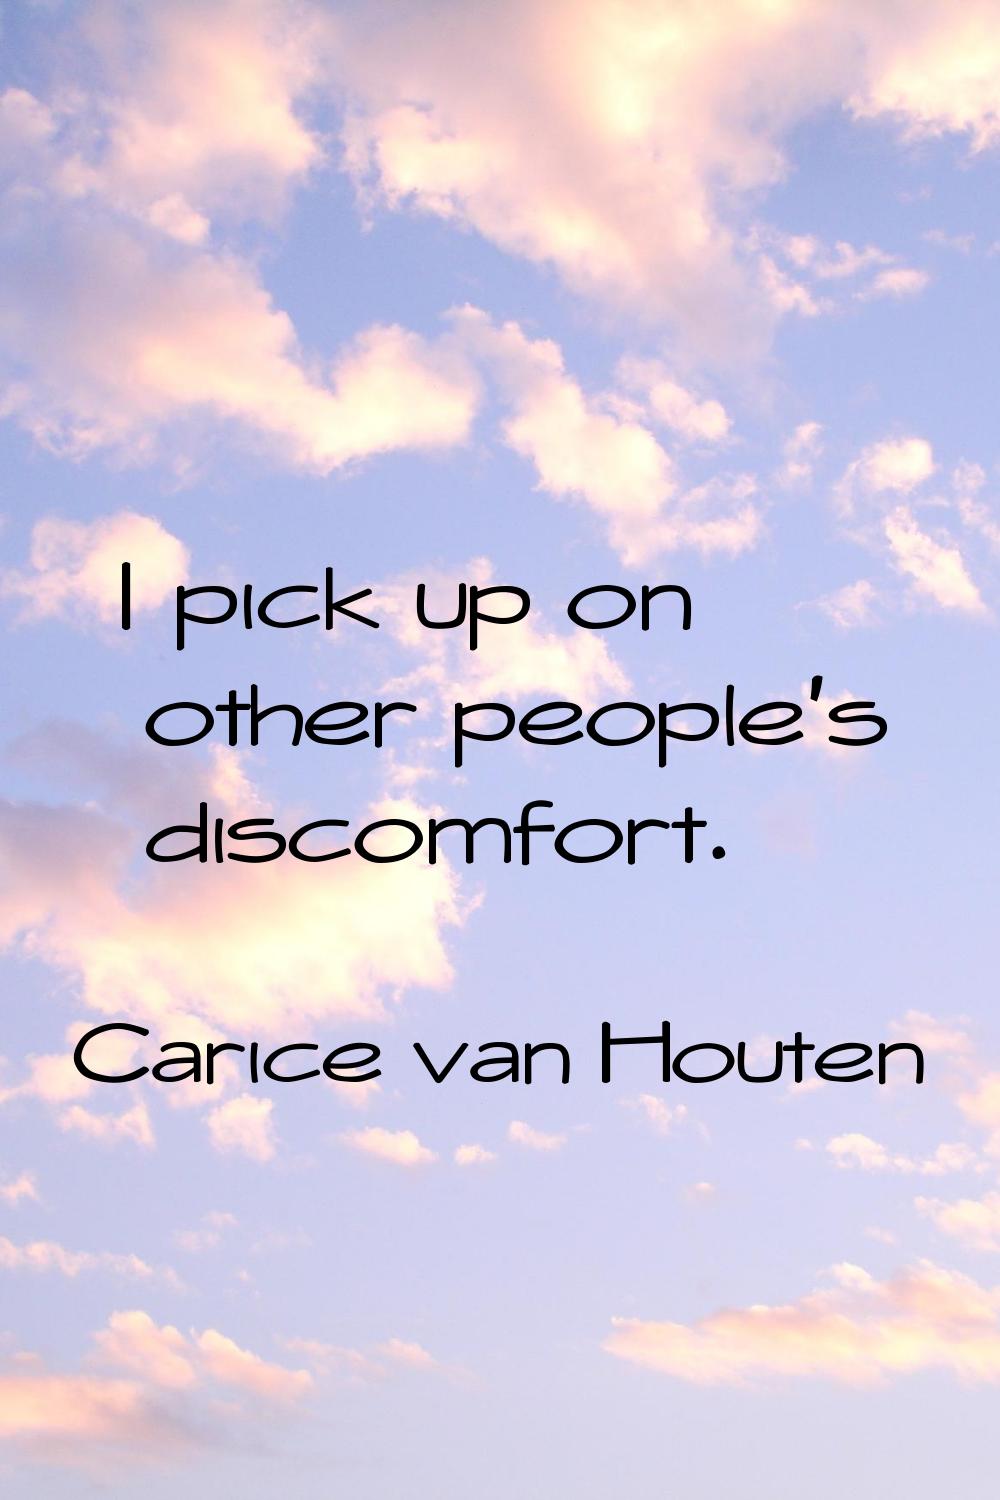 I pick up on other people's discomfort.